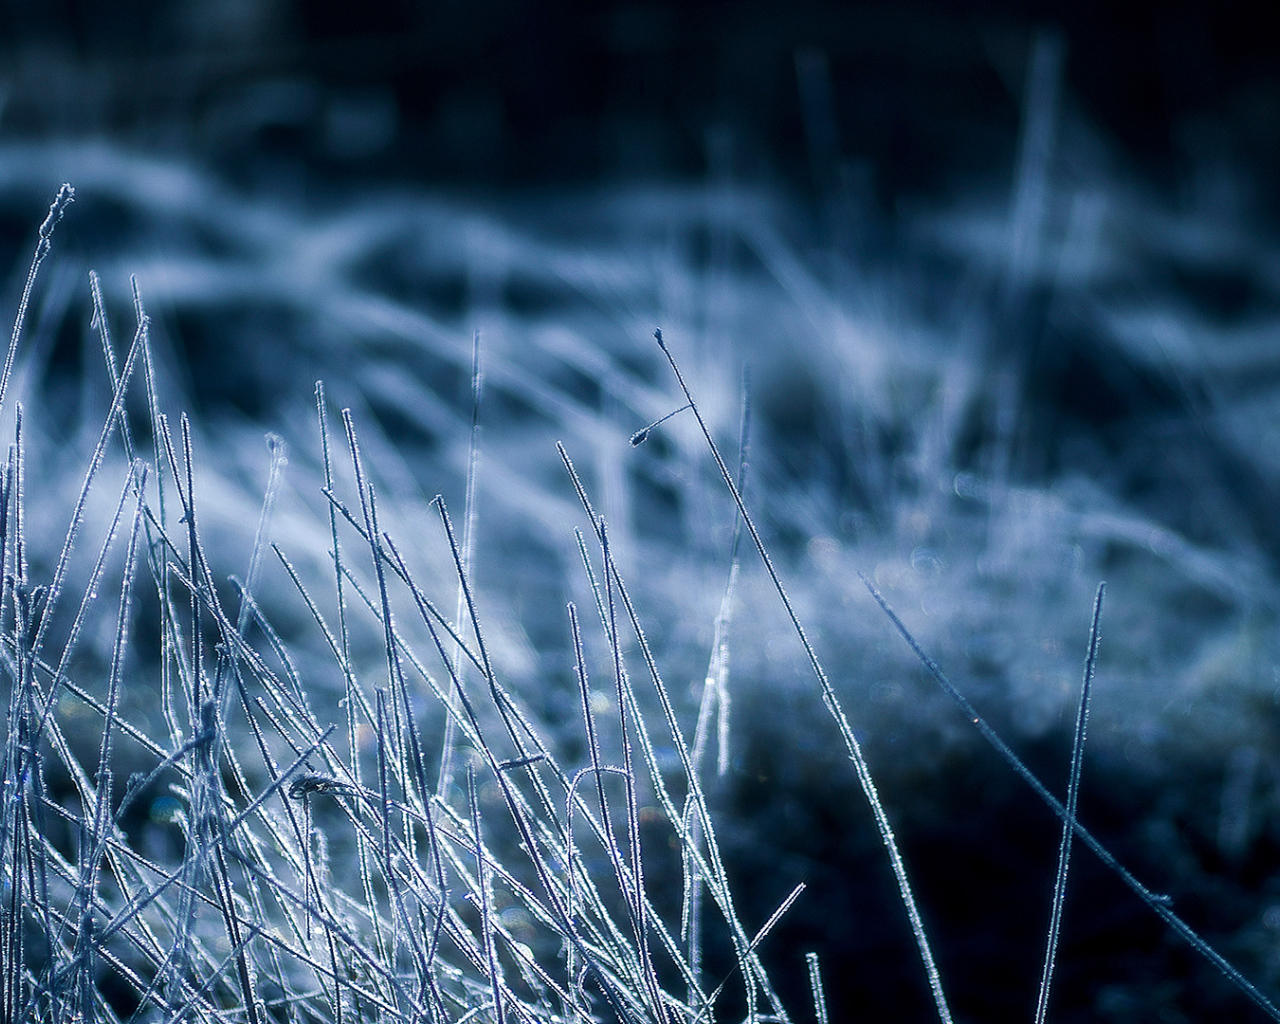 Covered with frost grass